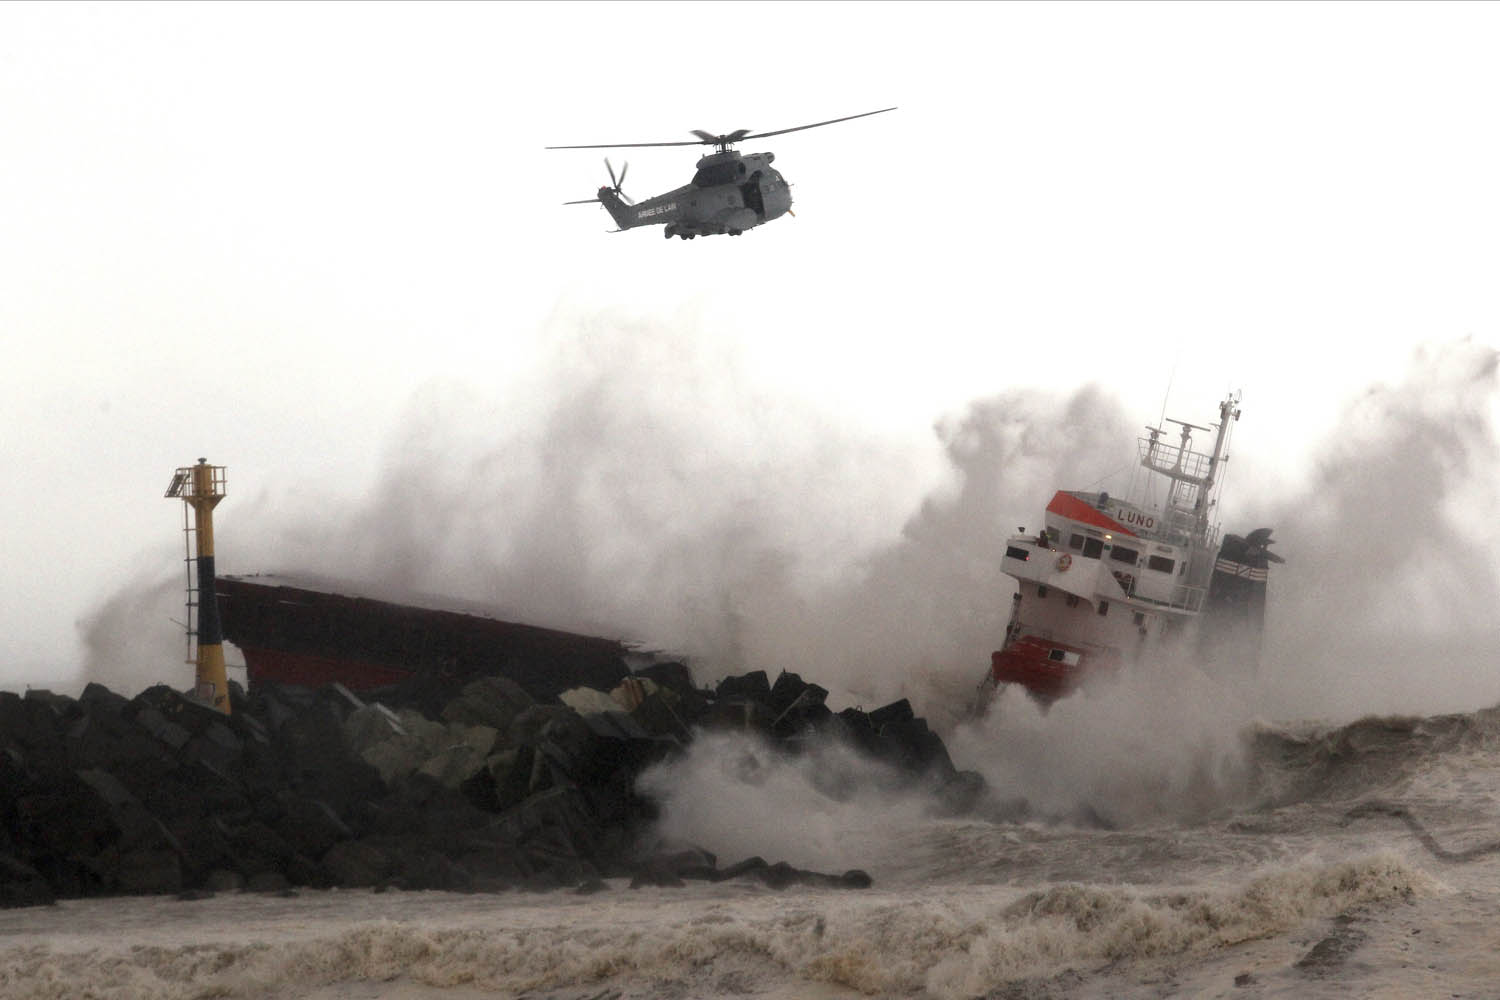 Feb. 5, 2014. A military helicopter flies over a Spanish cargo ship that slammed into a jetty in choppy Atlantic Ocean waters off Anglet, southwestern France.